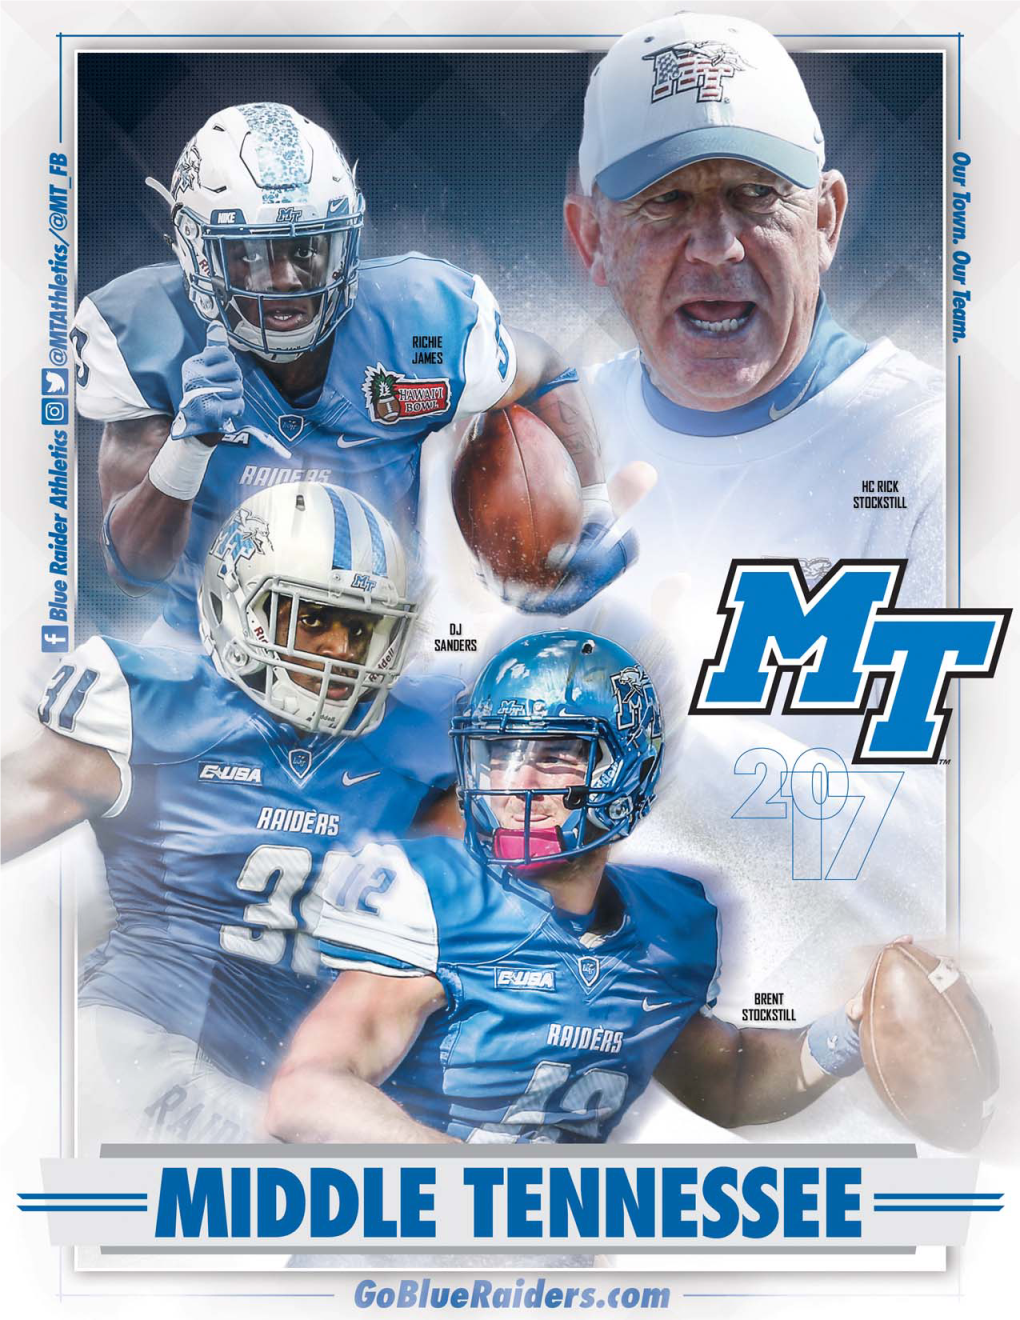 2017 Middle Tennessee Football Media Guide